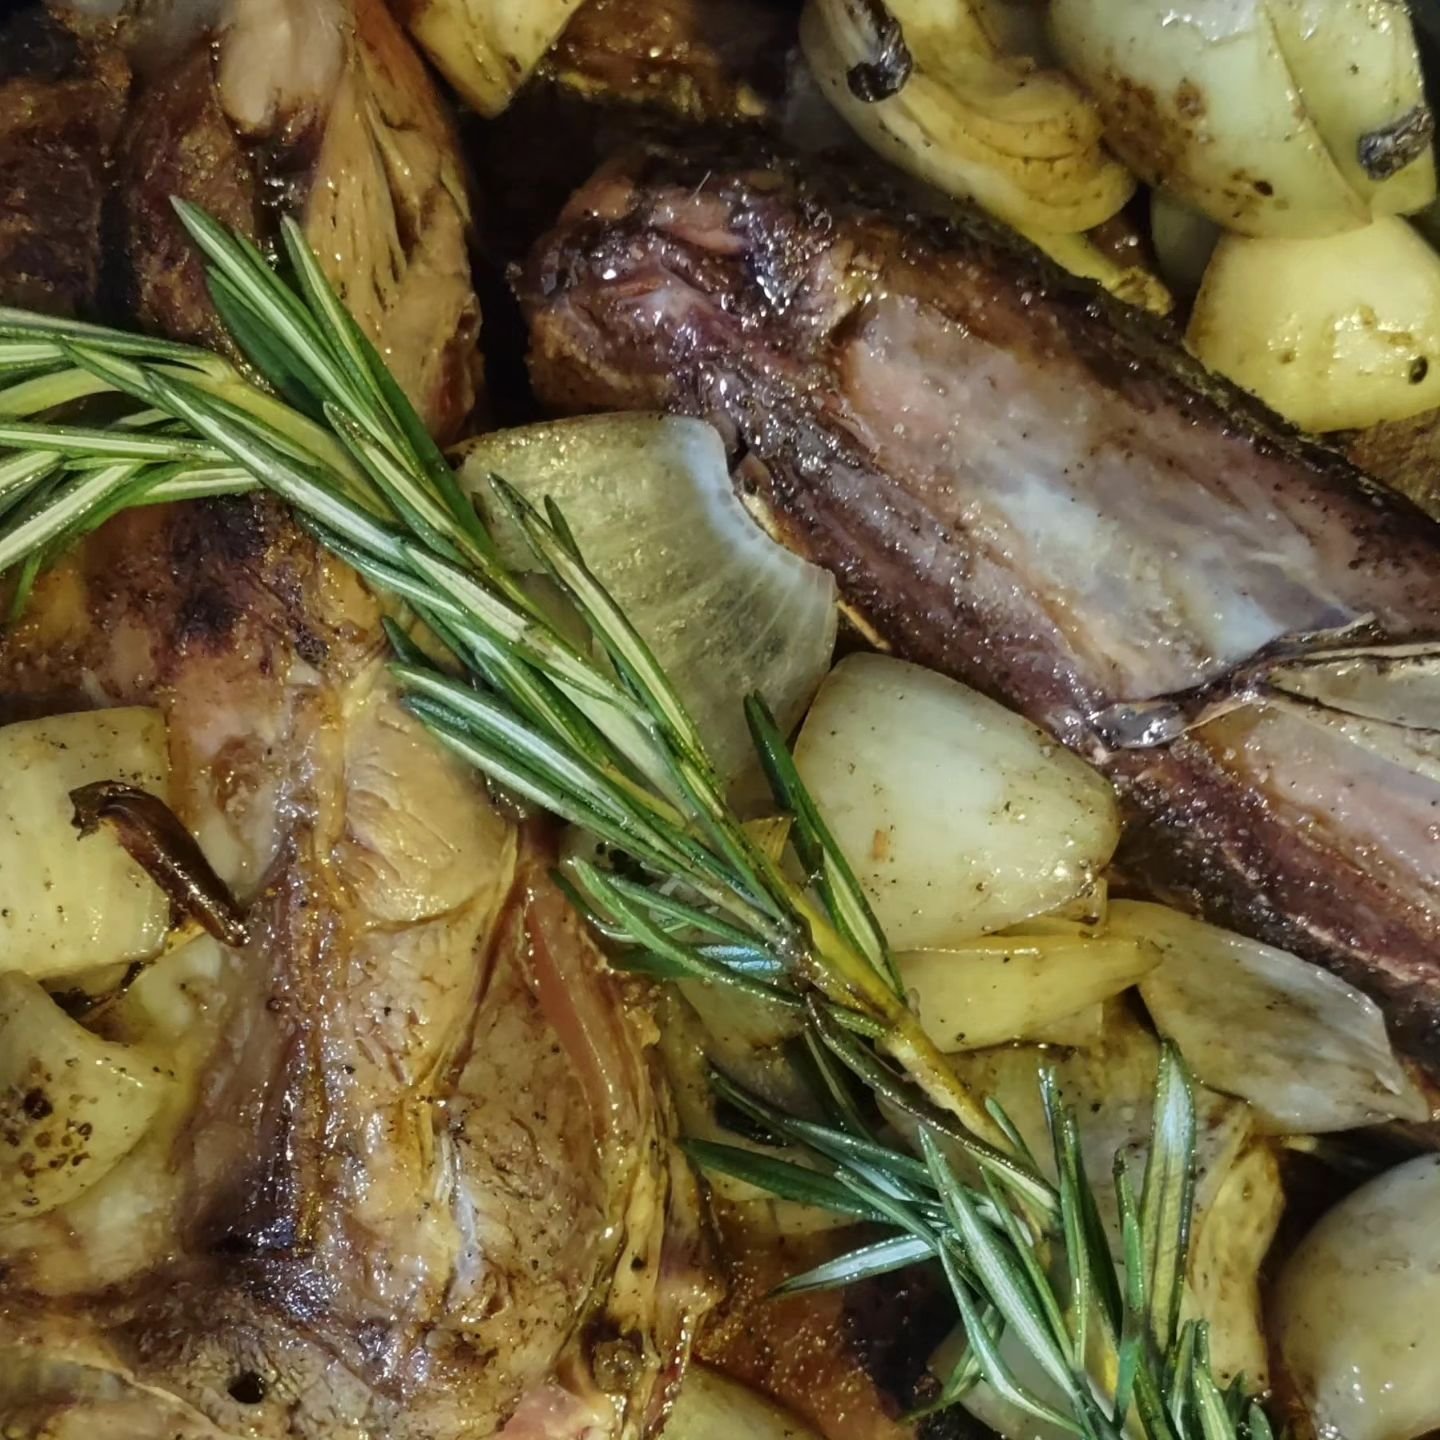 This week's special will be Braised Lamb from @BeldingHillFarms, with feta, artichokes and oregano 🤤 

We will only have a limited quantity available every day, so make sure to get yours early! See you this weekend 👋😃

#braisedlamb #pizzaspecial #